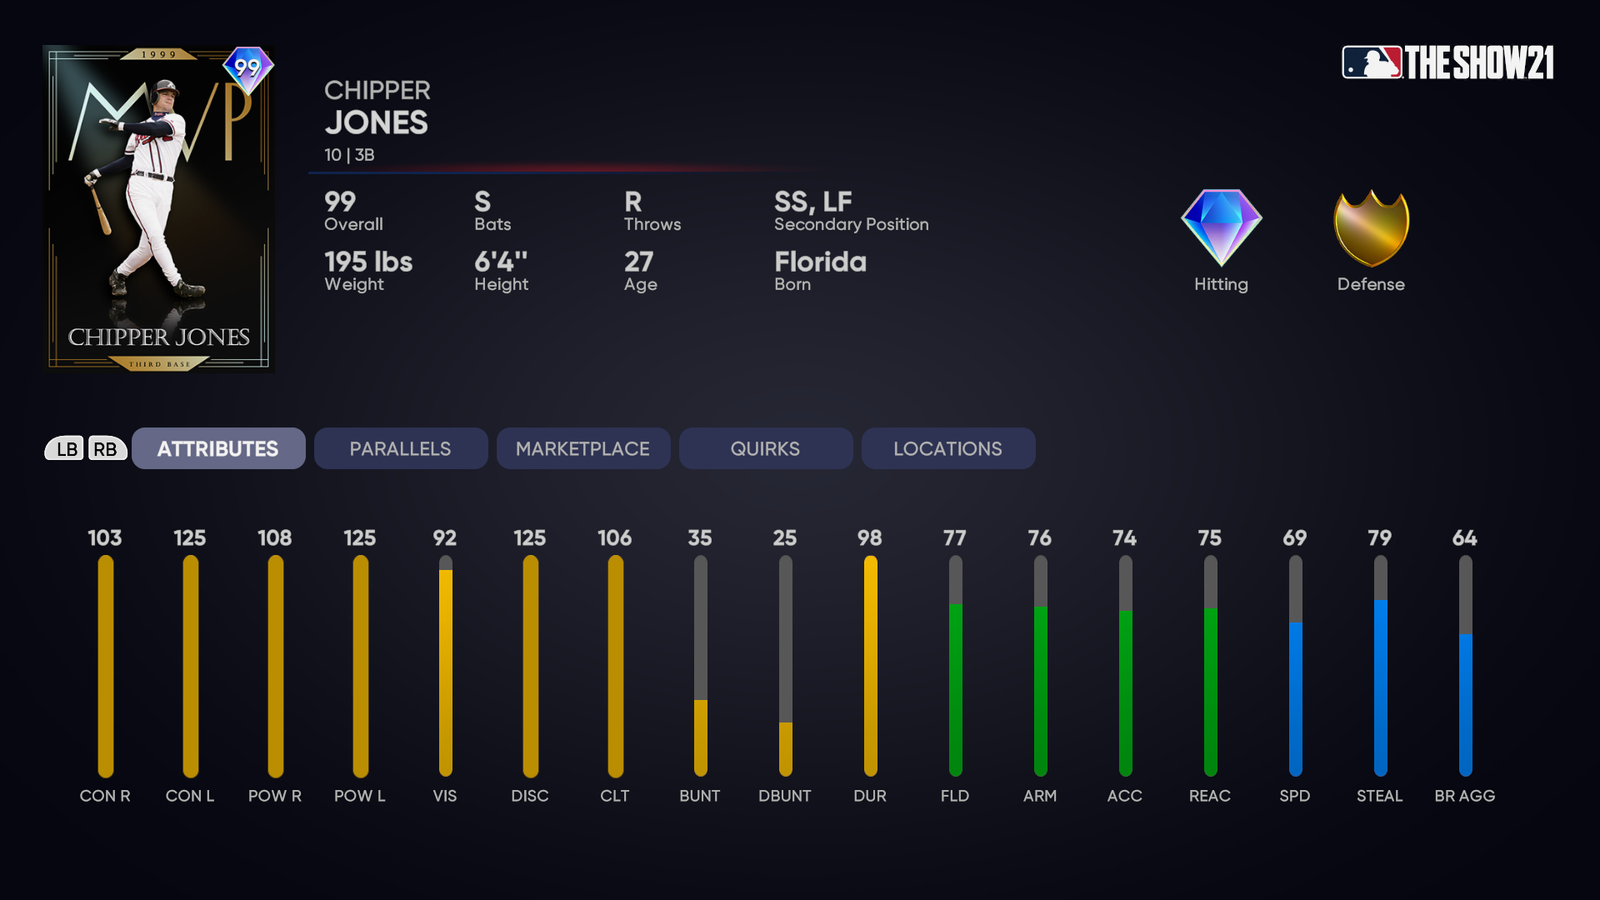 MLB The Show 21 Diamond Dynasty Best Players Ratings Highest Rated Chipper Jones